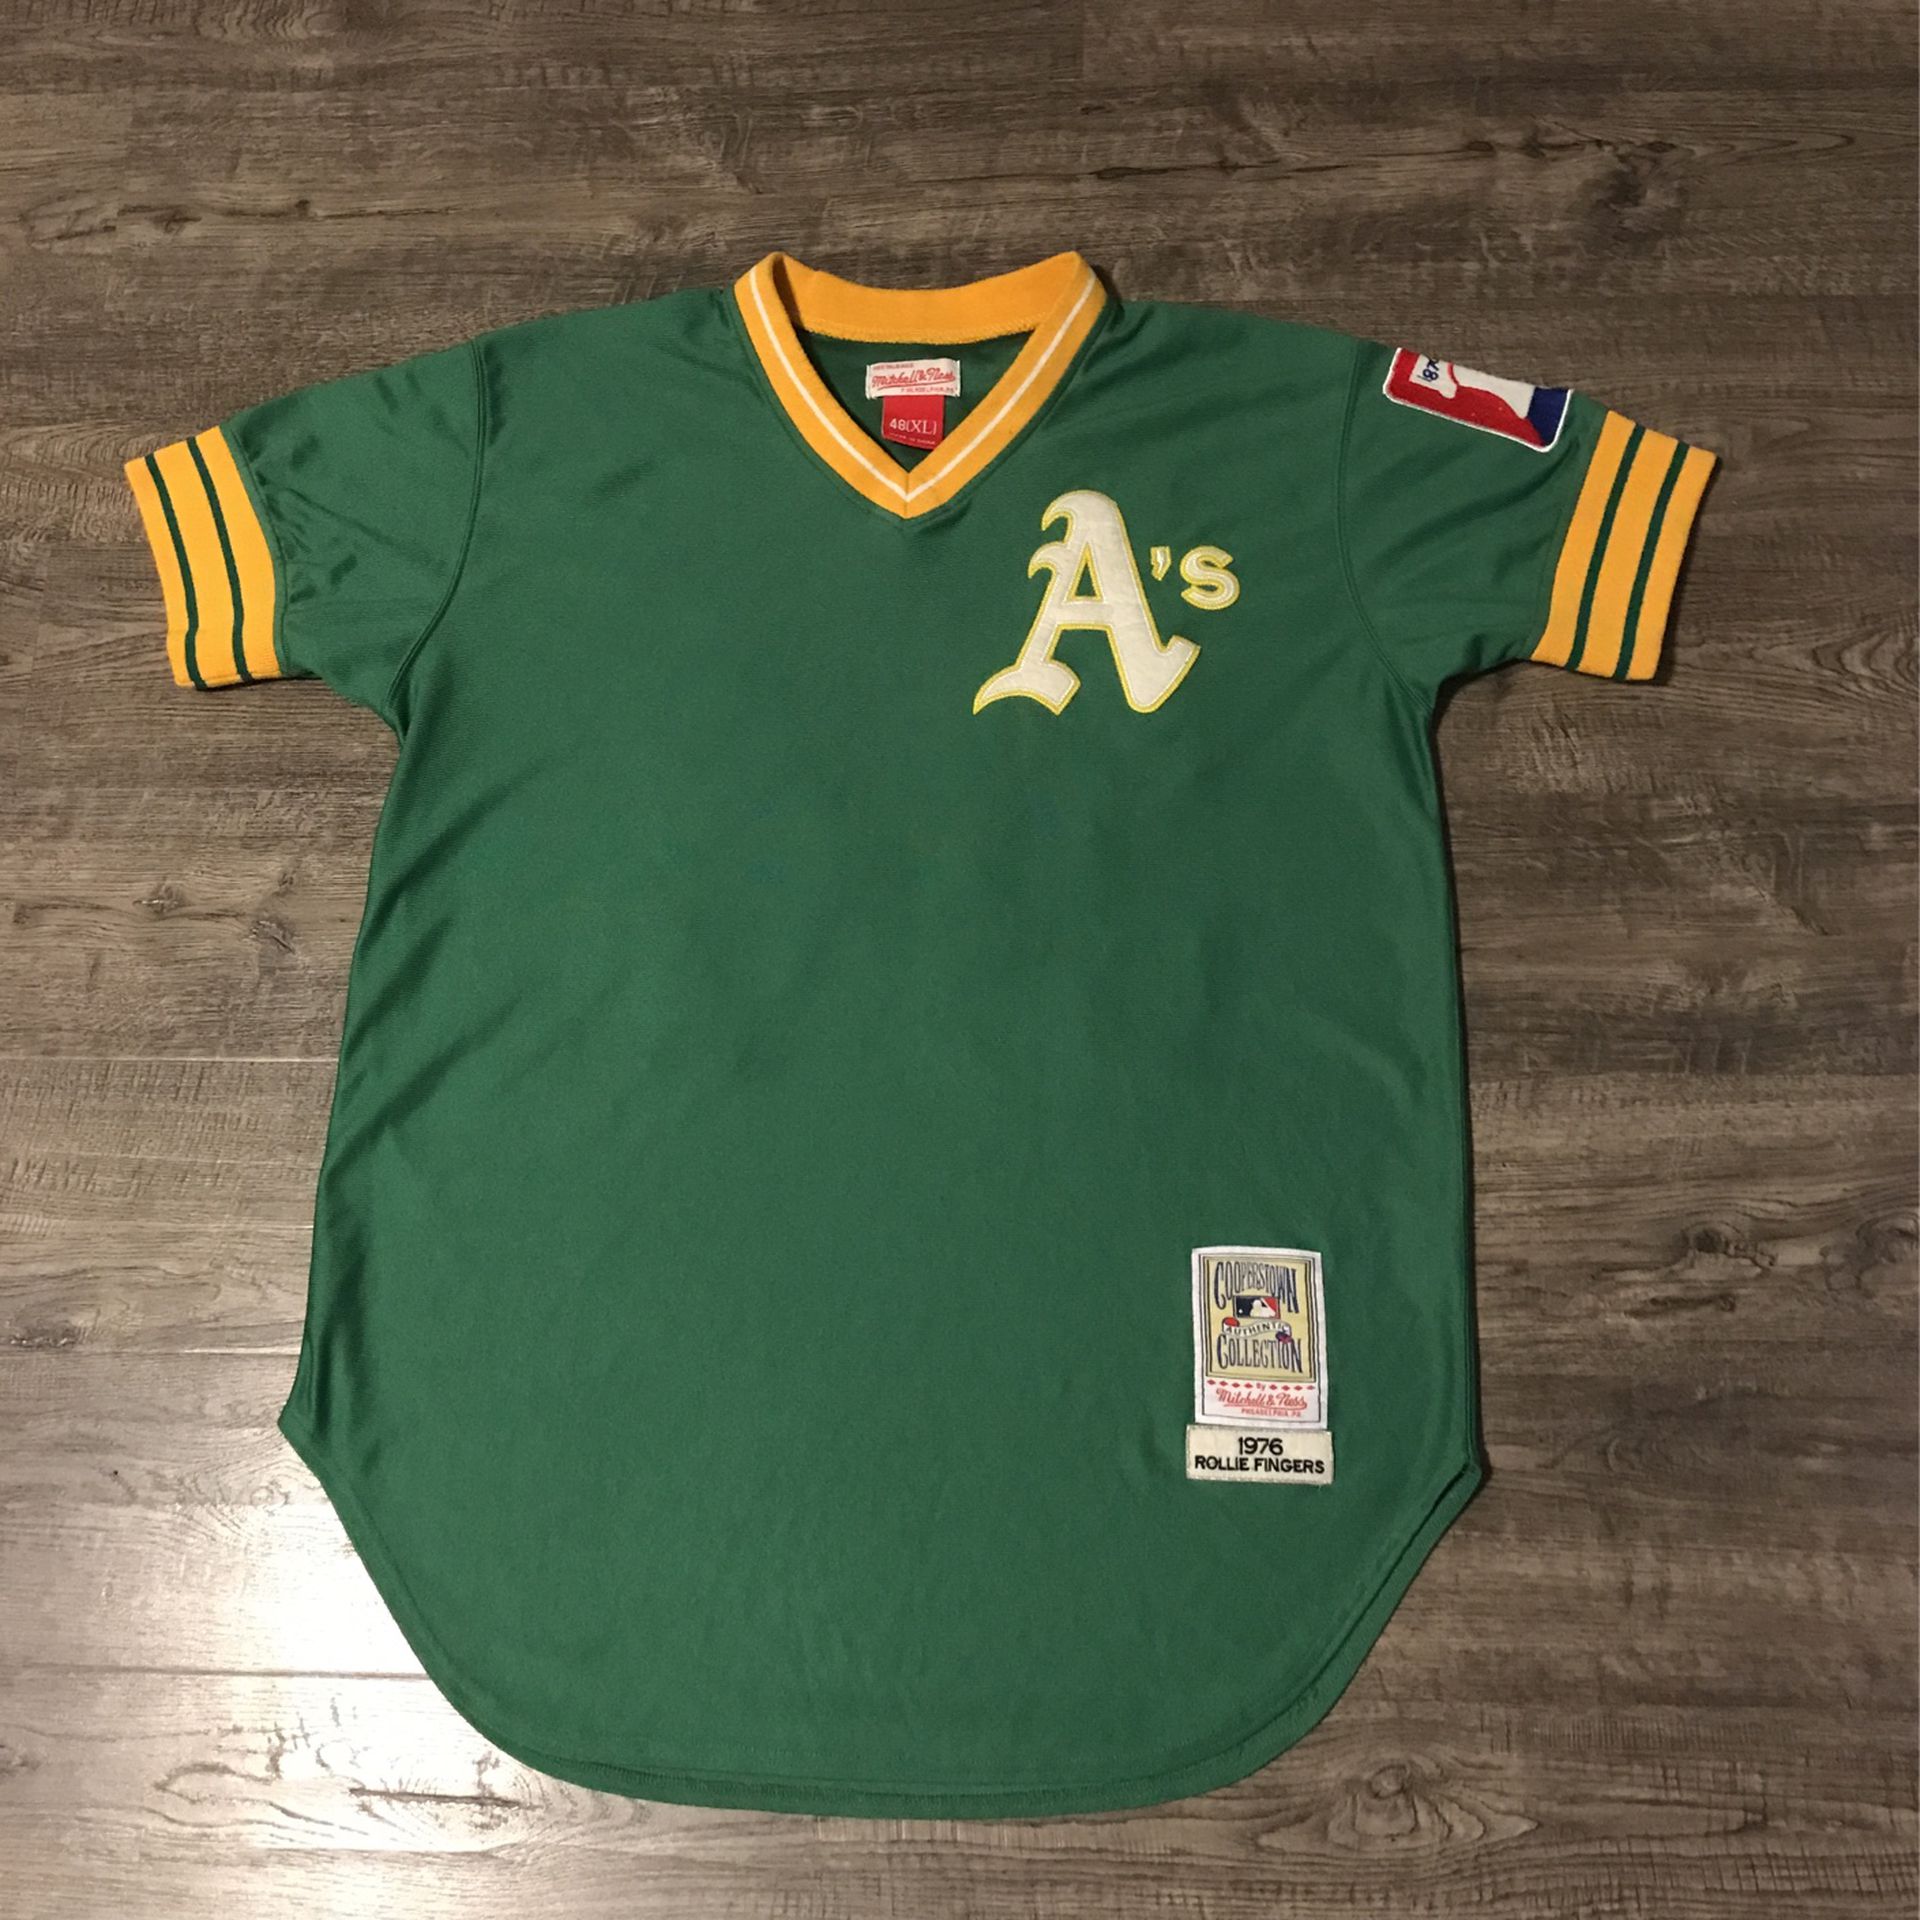 Oakland A's Throwback Jersey for Sale in Tacoma, WA - OfferUp